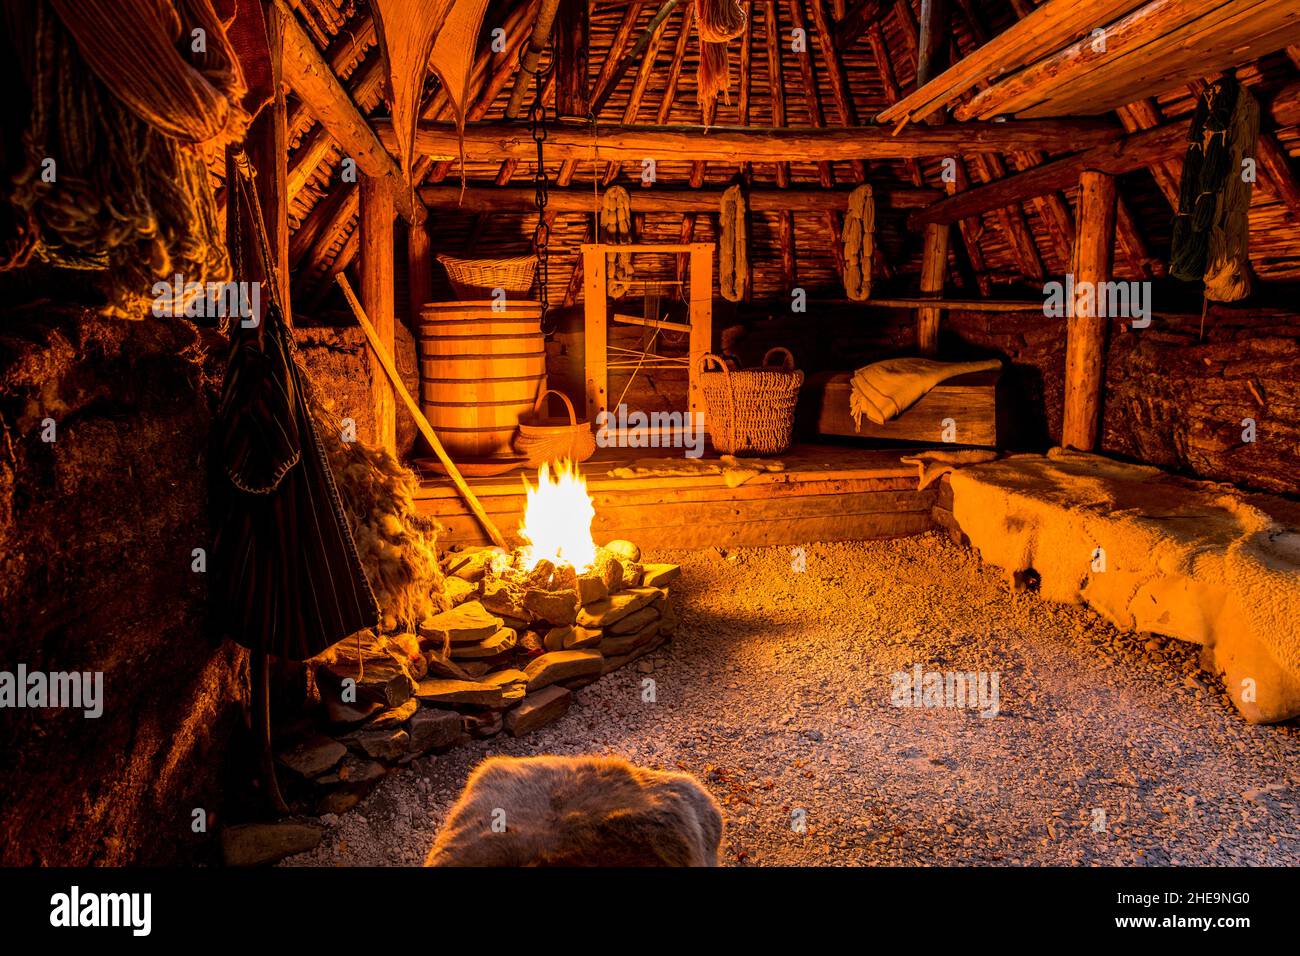 Recreation of a Viking Long House at L'Anse aux Meadows National Historic Site, Great Northern Peninsula, Newfoundland, Canada. Stock Photo